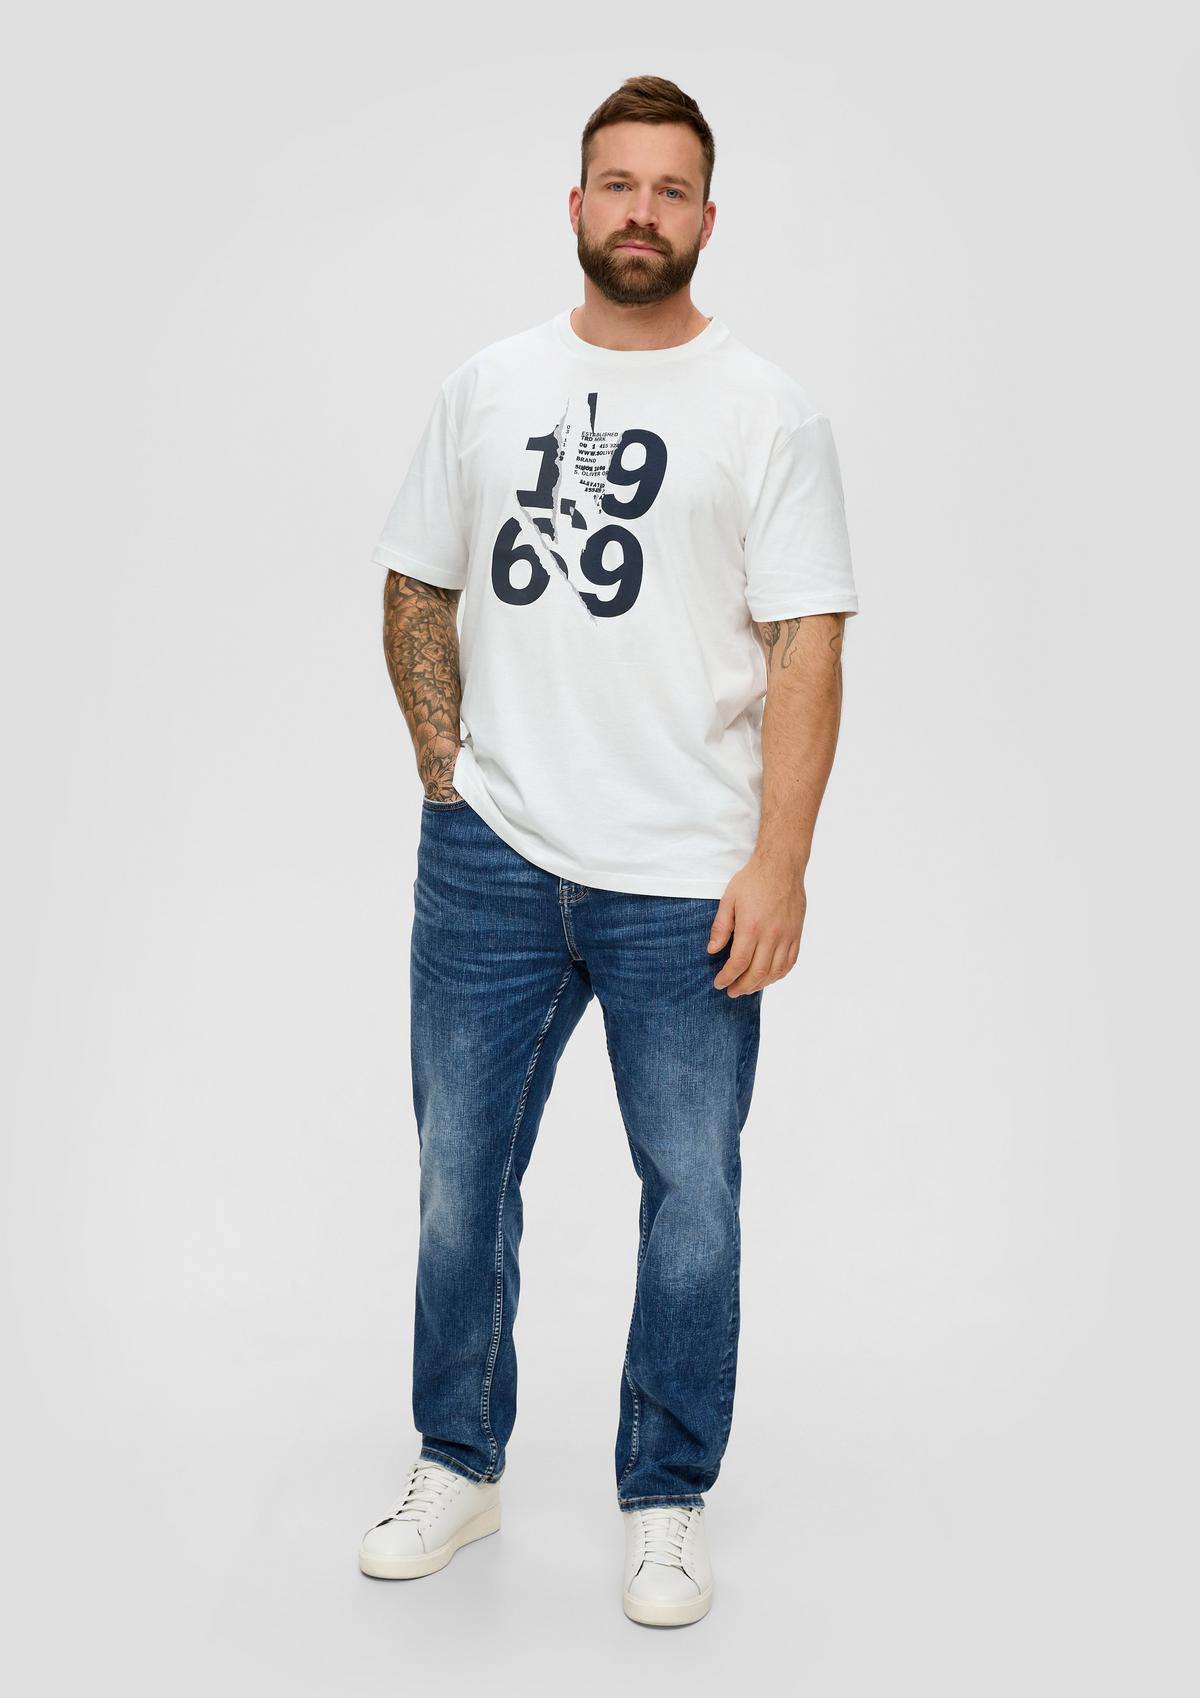 - print white T-shirt a front with